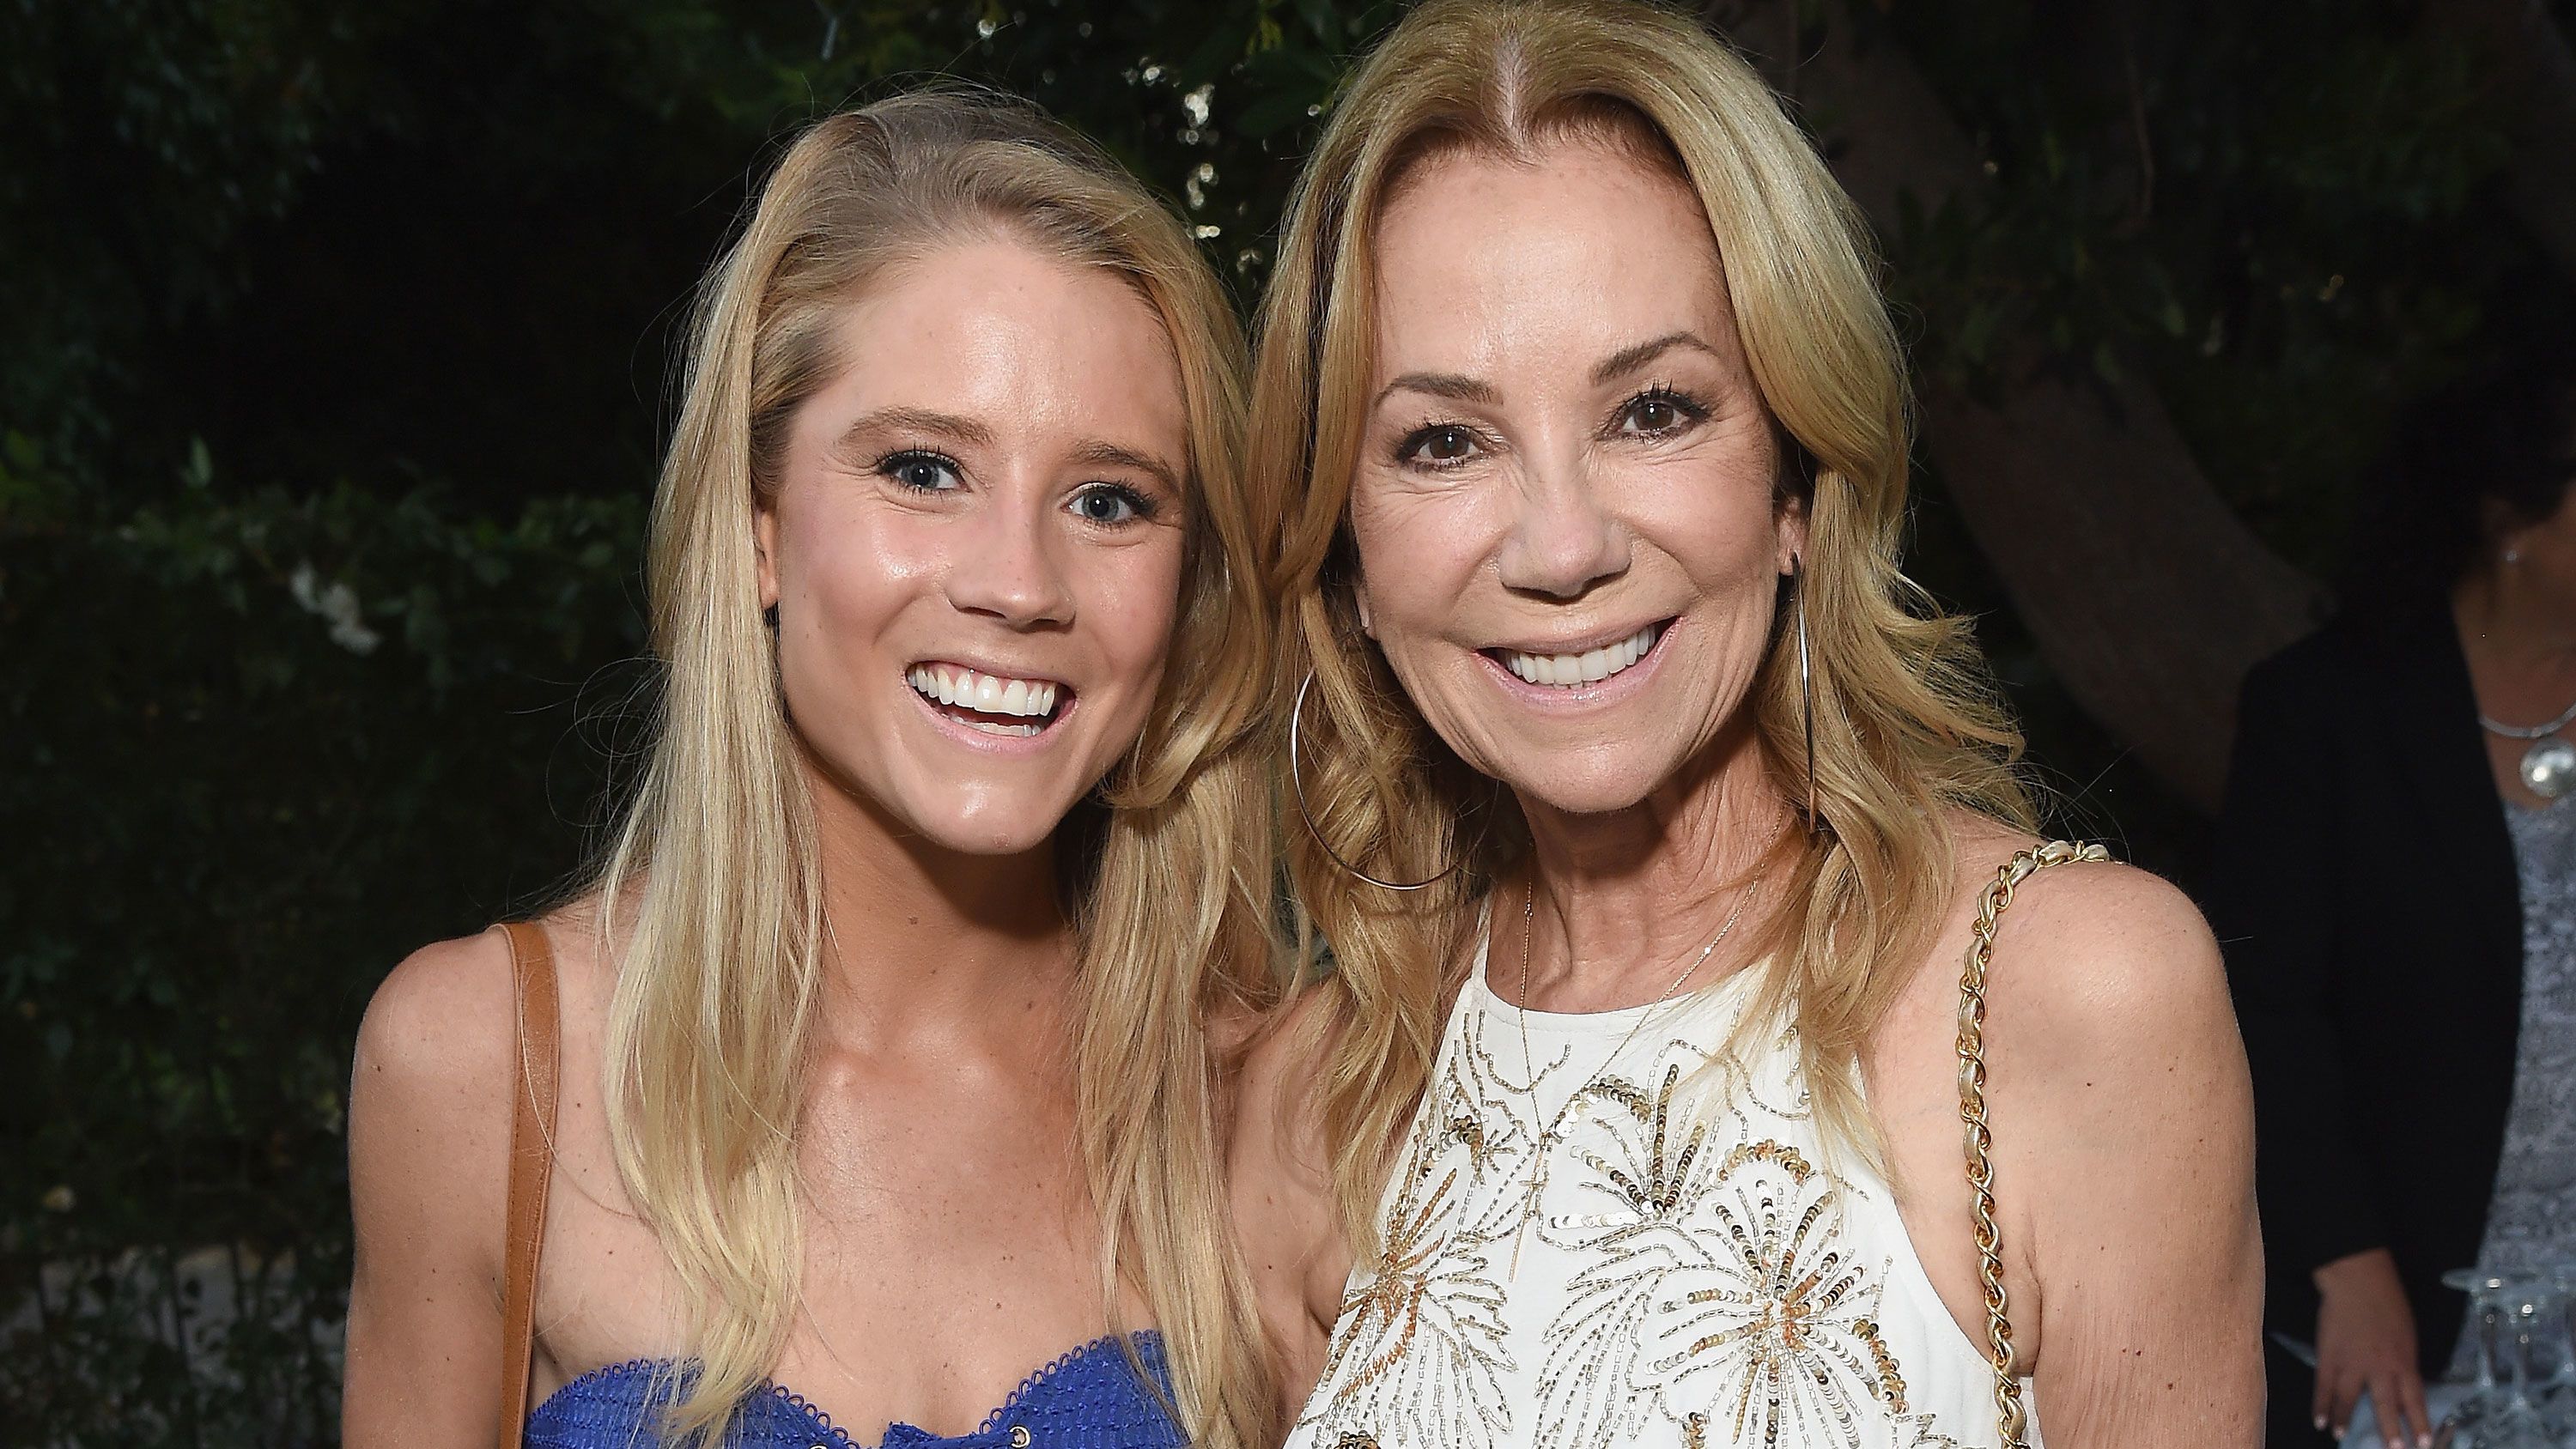 Kathie Lee Gifford's daughter Cassidy is engaged | CNN